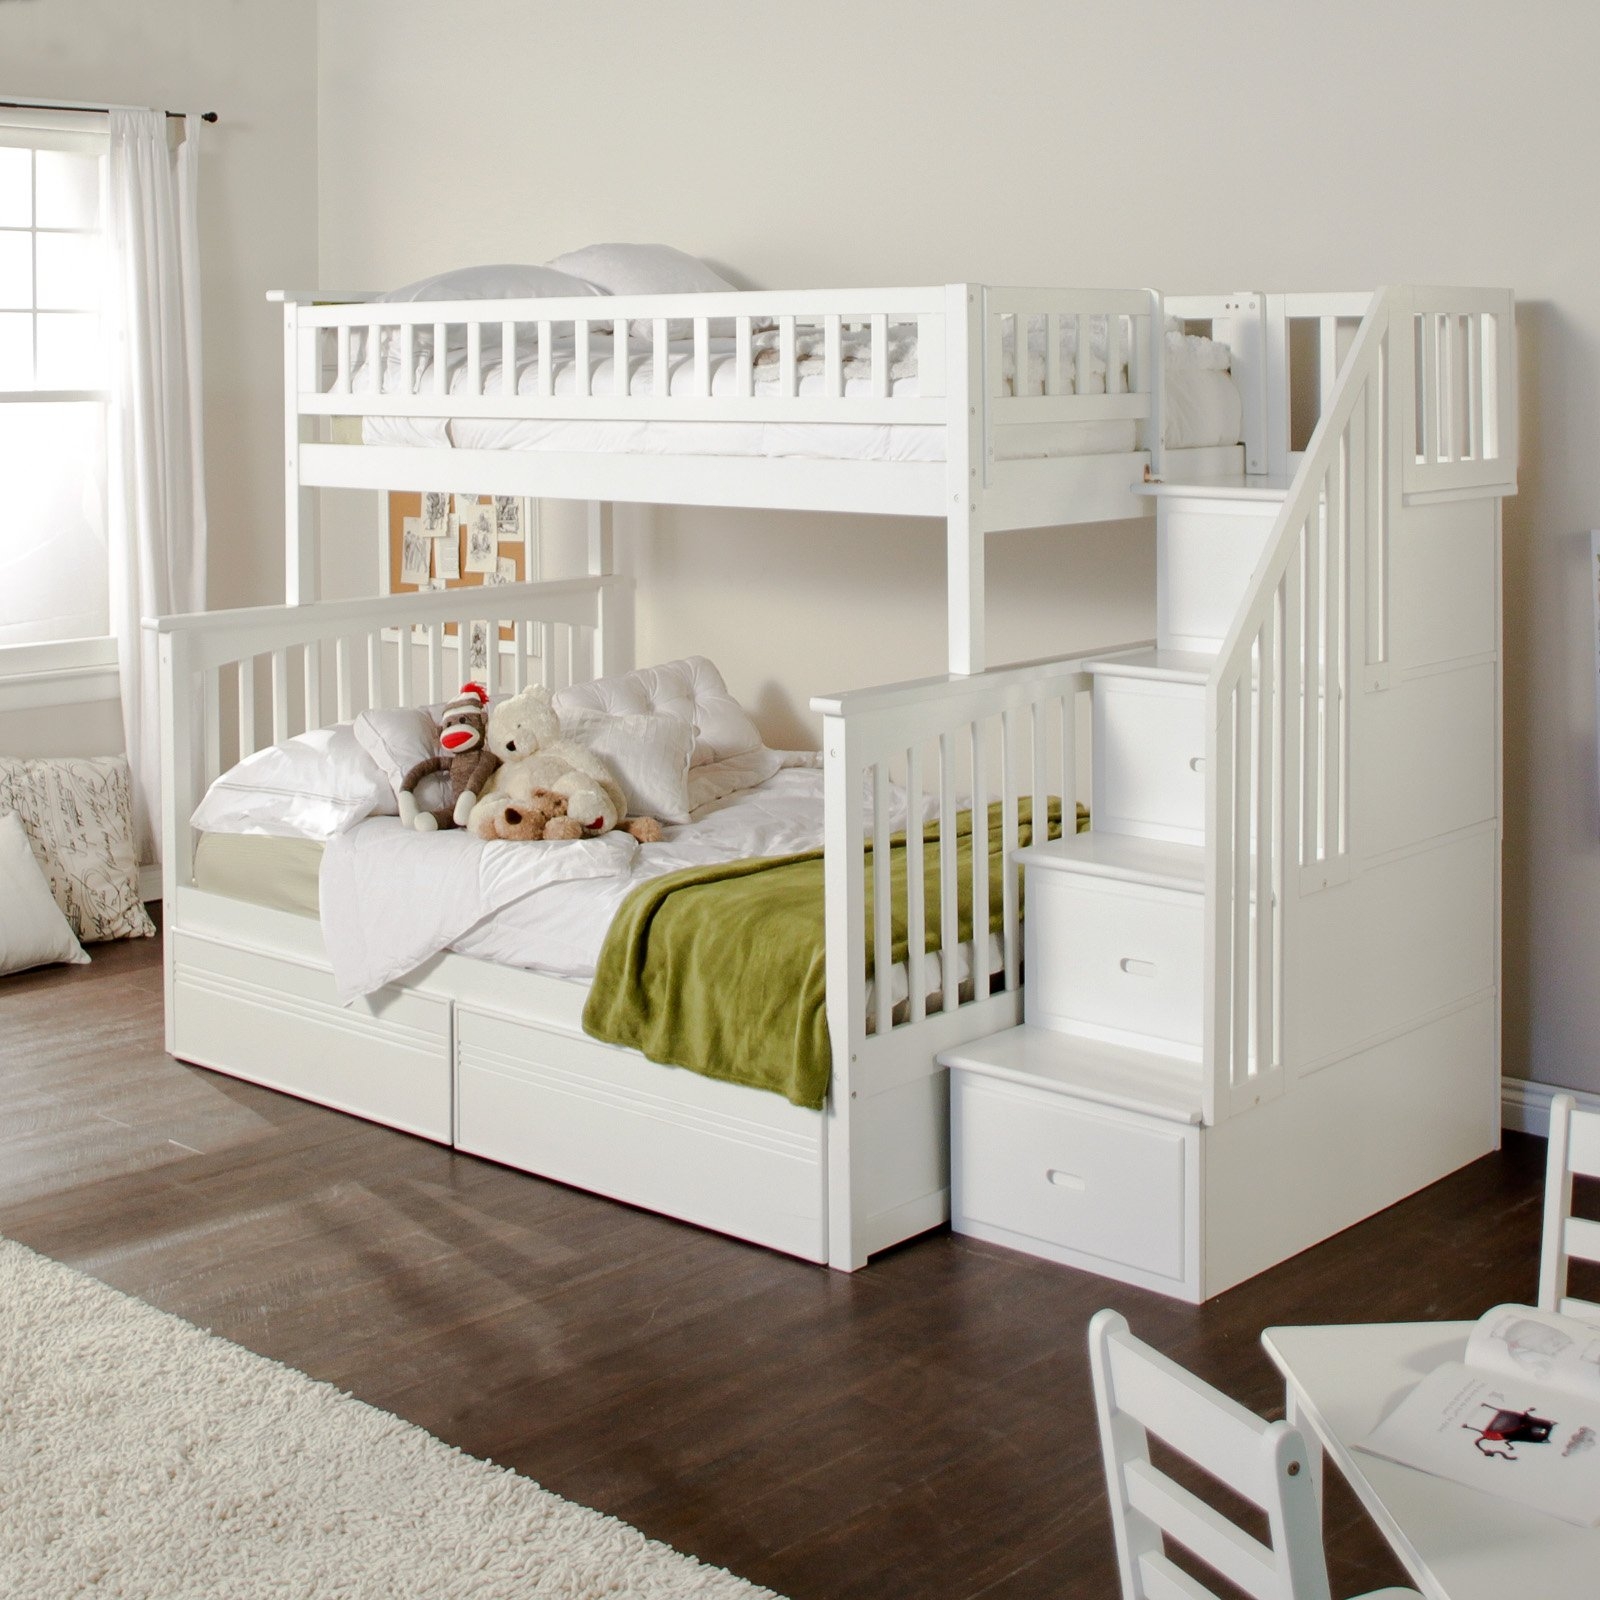 Construction bunk beds with underbed and under stairs storage drawers